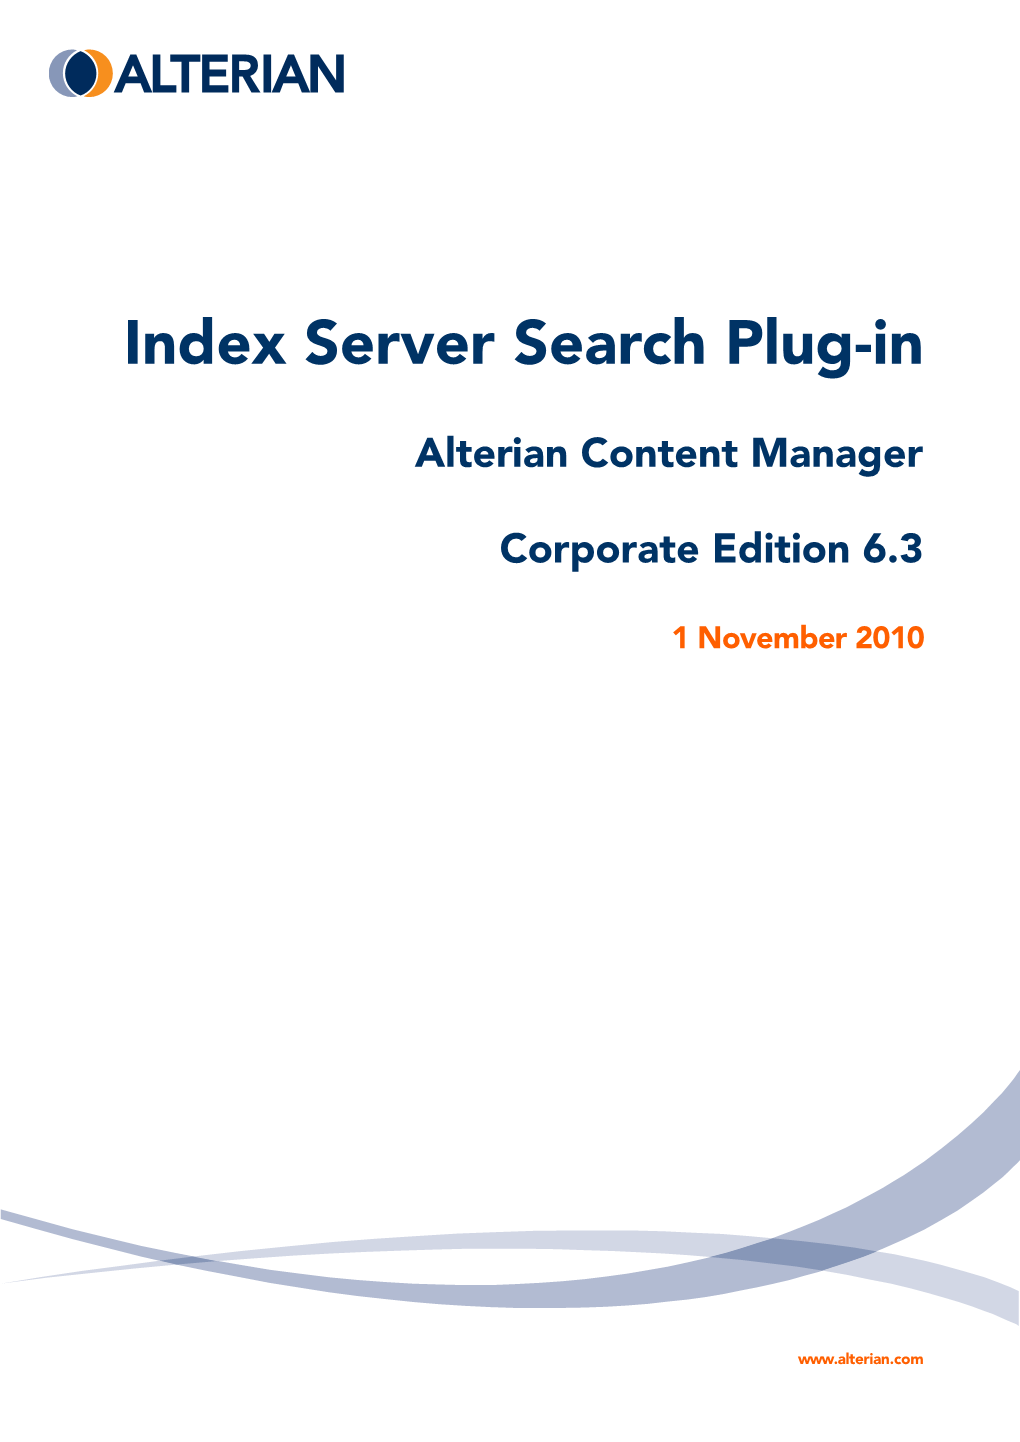 Index Server Search Plug-In